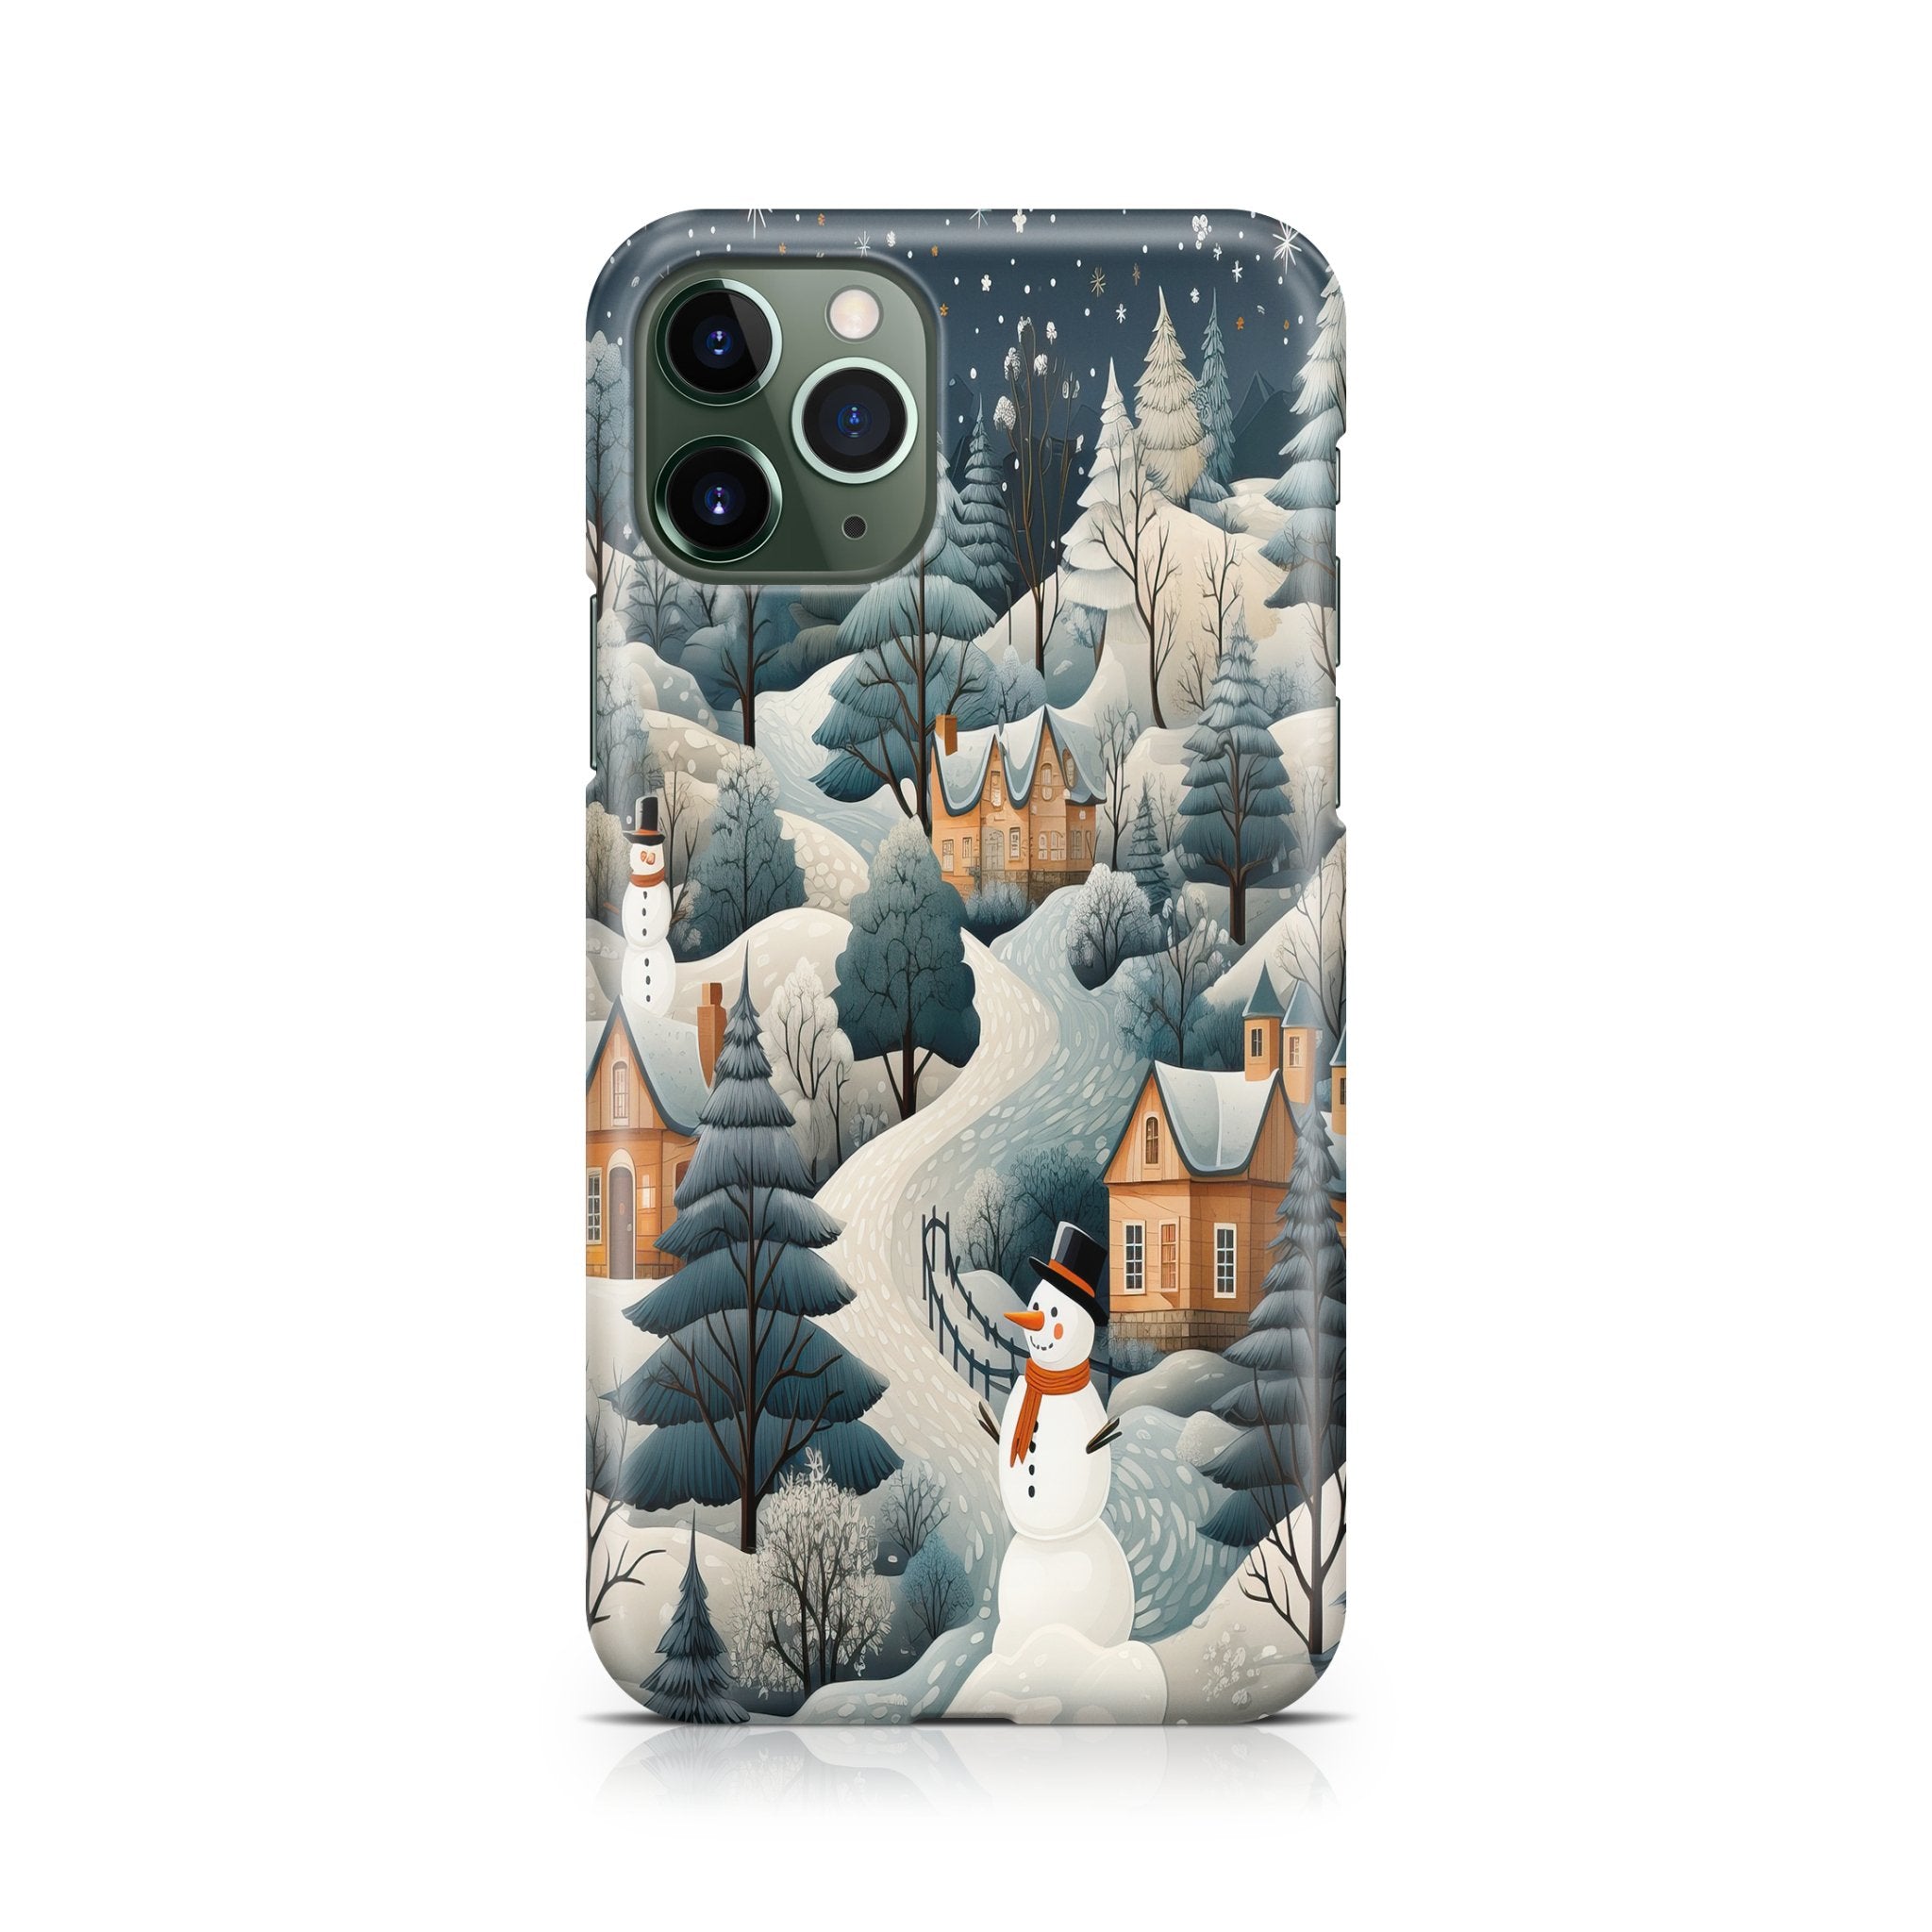 Winter Night - iPhone phone case designs by CaseSwagger